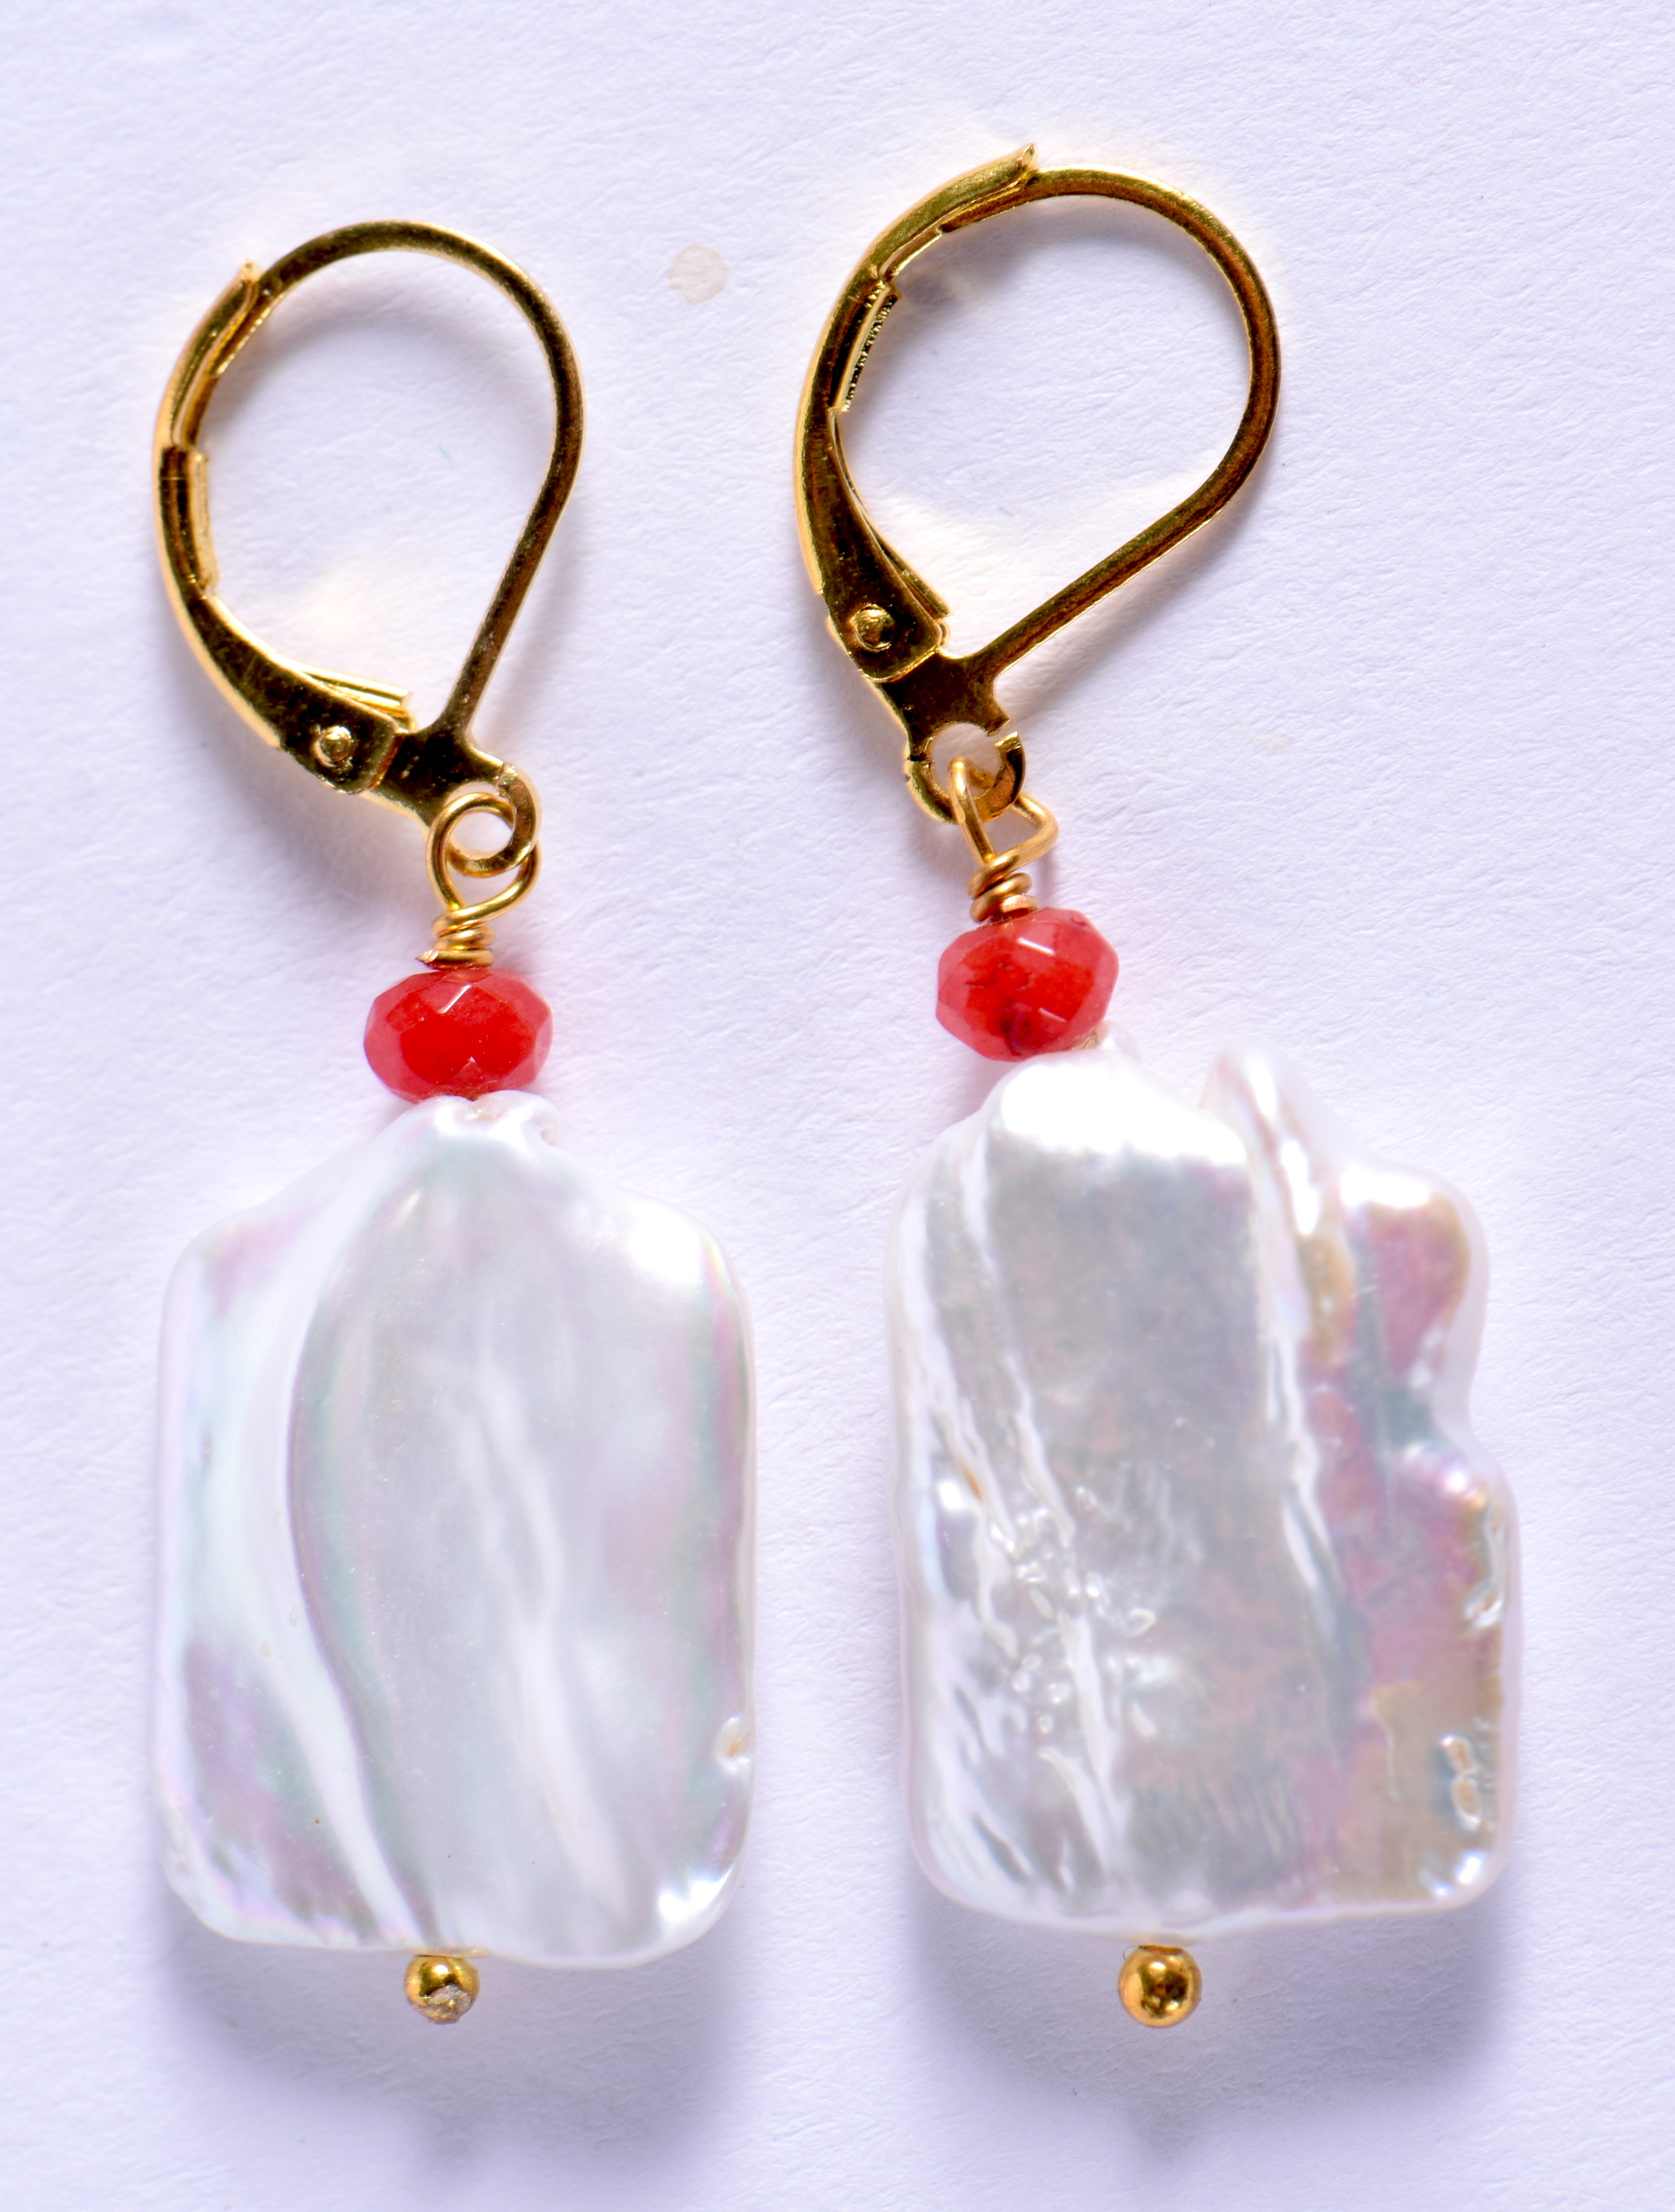 A PAIR OF PEARL AND CORAL EARRINGS. 3 cm x 1.5 cm.